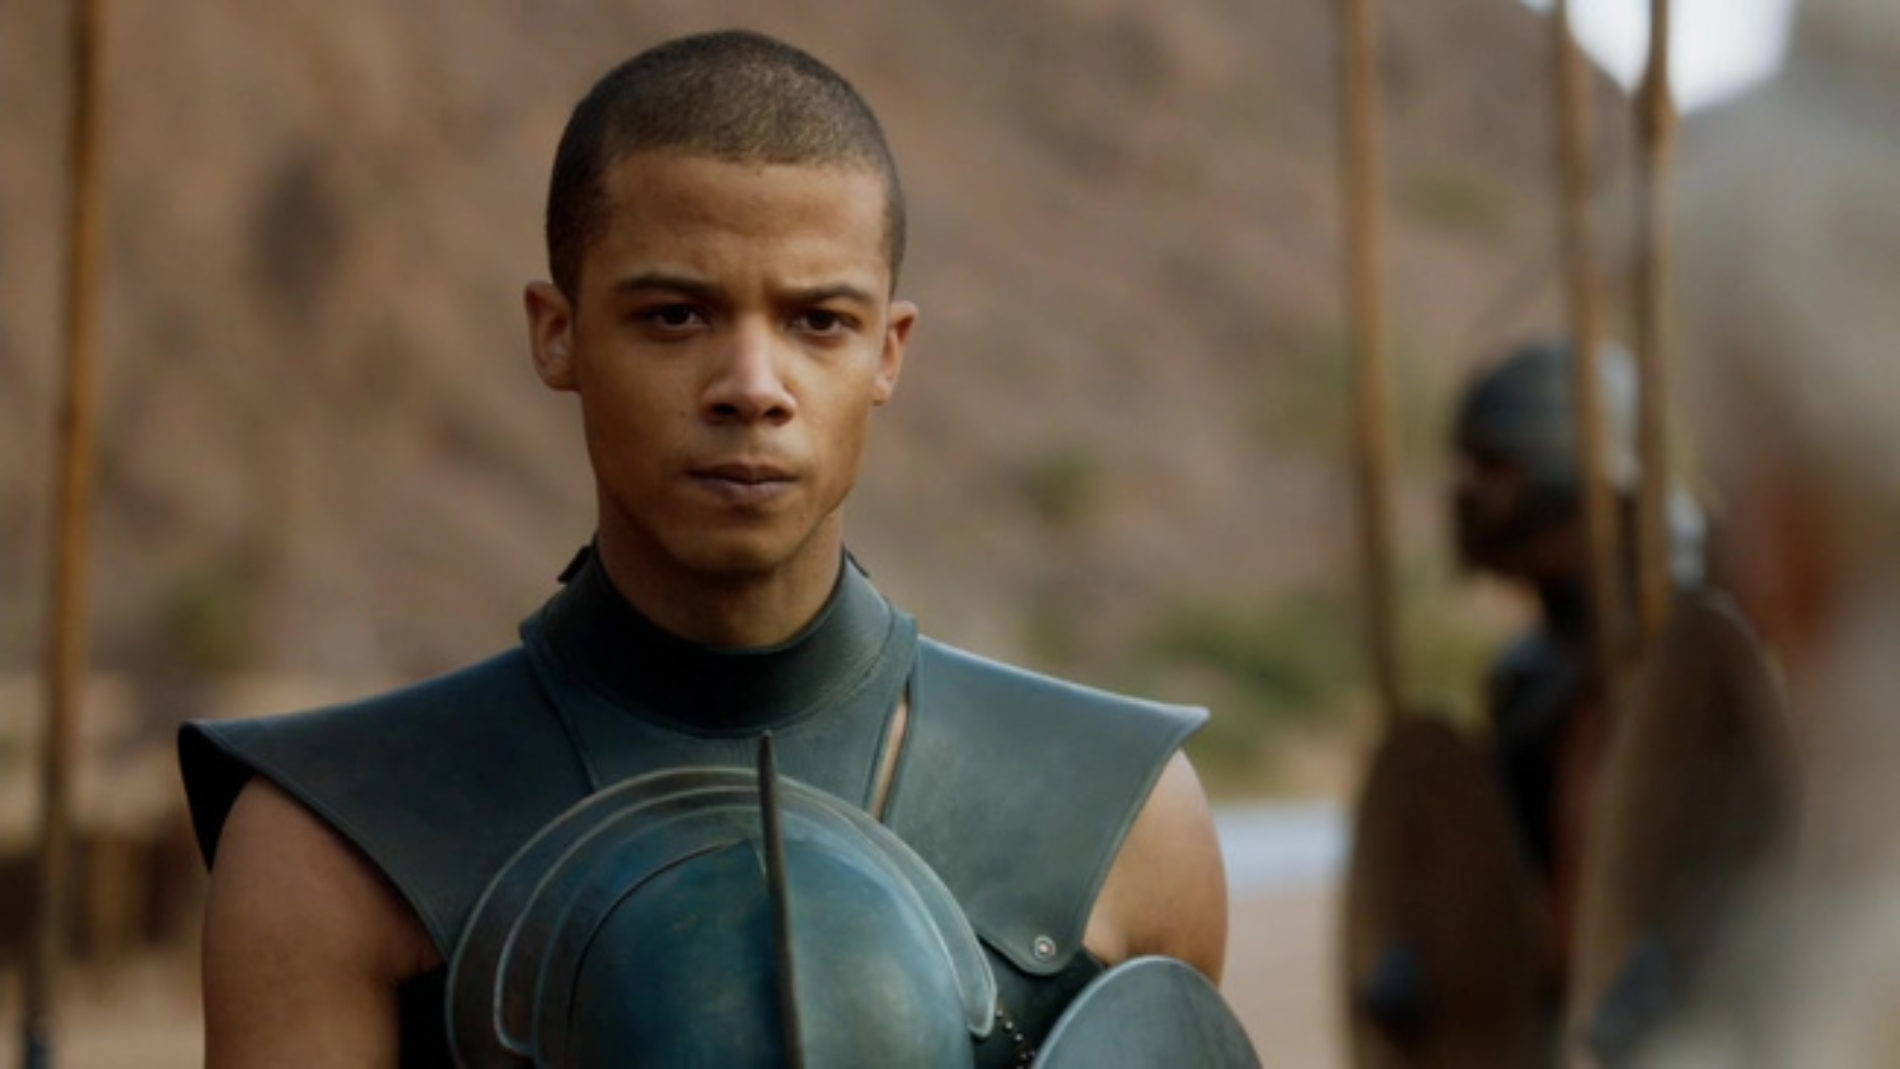 ‘Game Of Thrones’ Star Jacob Anderson says people think he’s really castrated